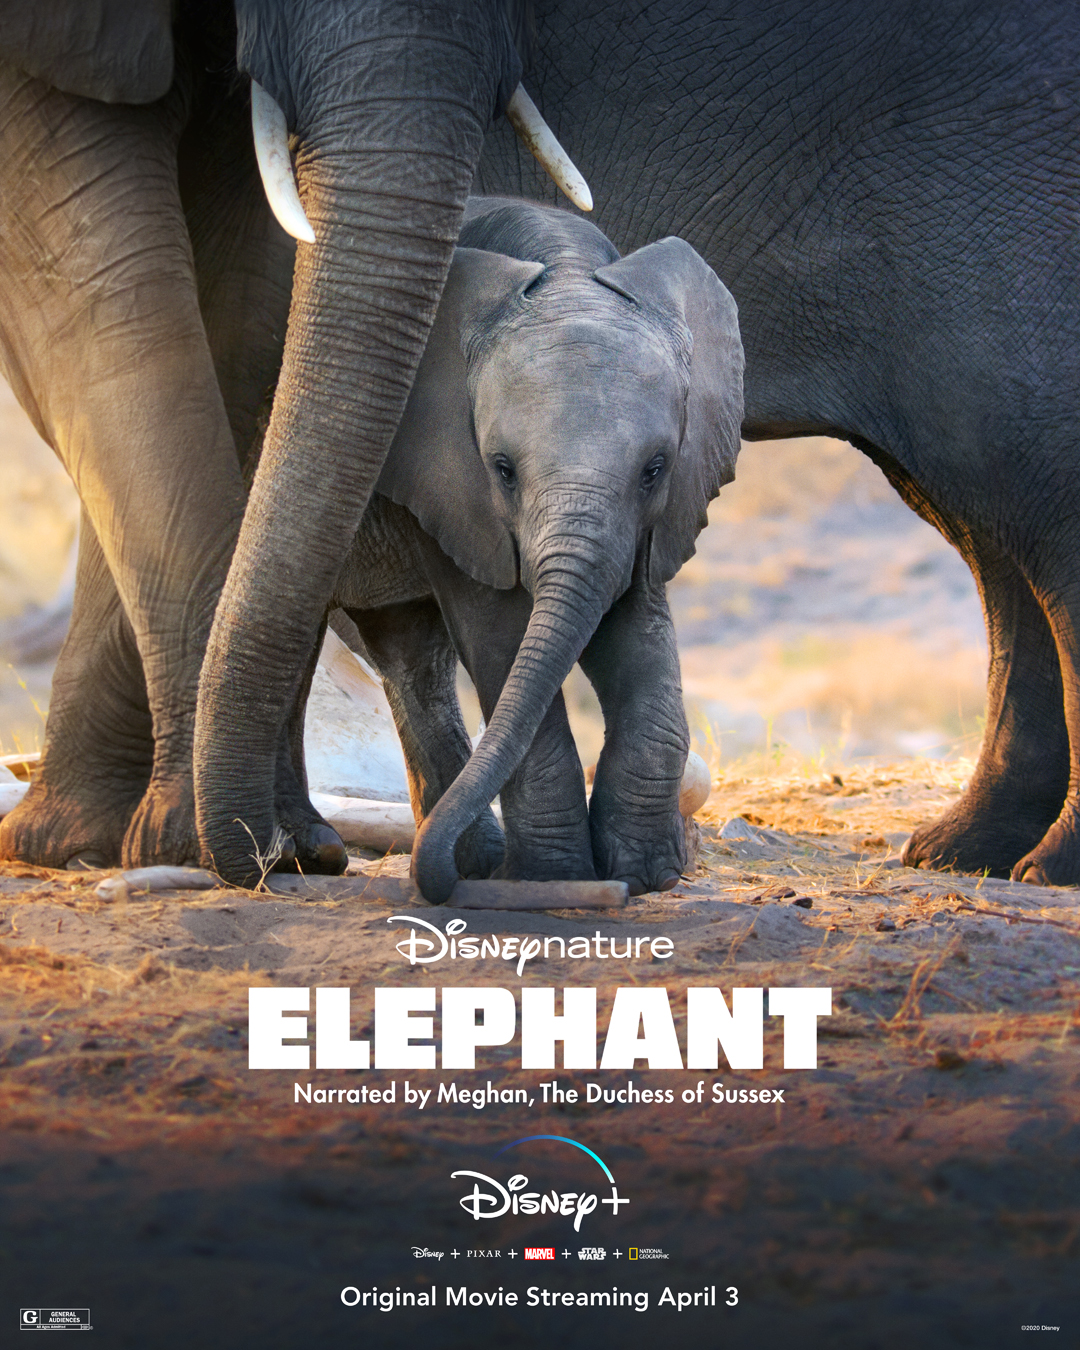 Disney + Honors Earth Month With New DisneyNature Films Narrated By Meghan Markle